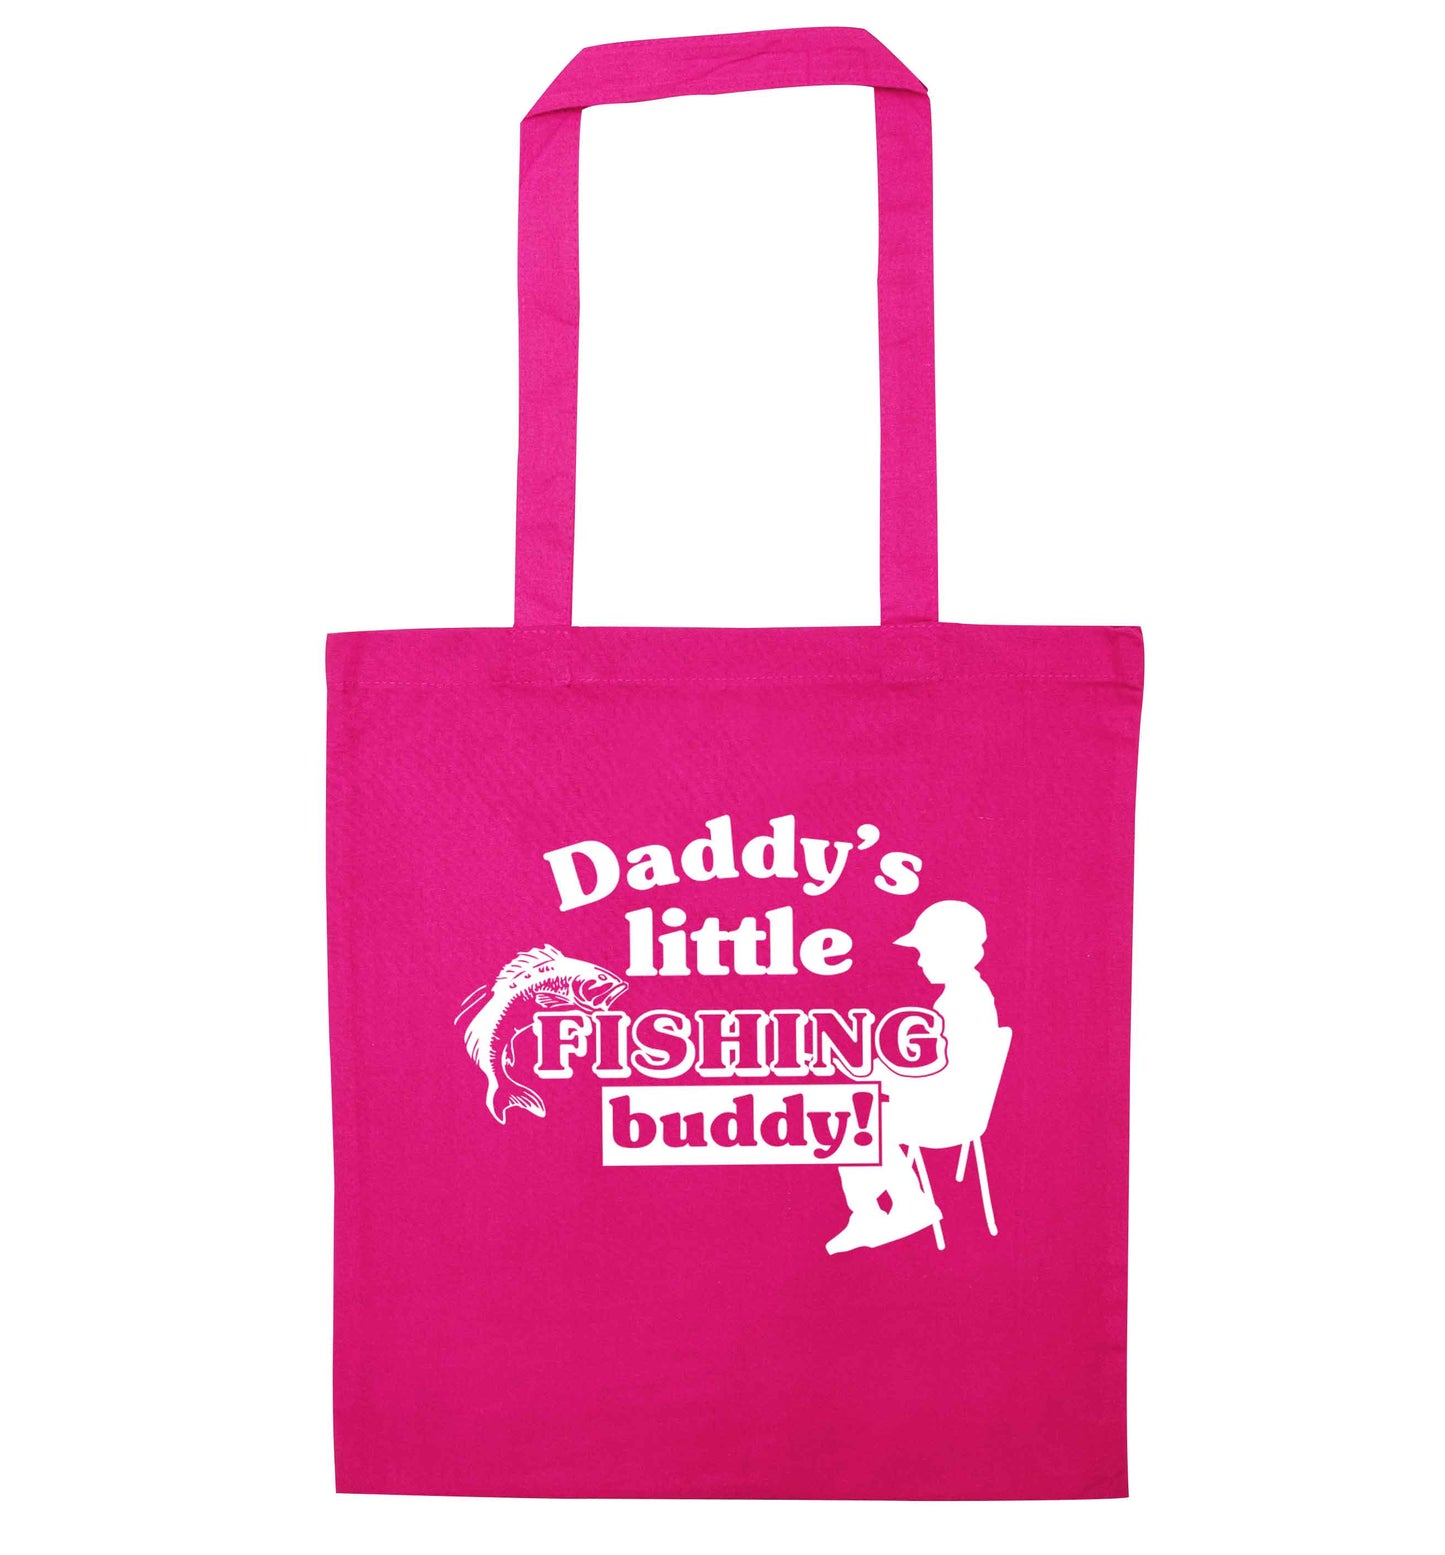 Daddy's little fishing buddy pink tote bag